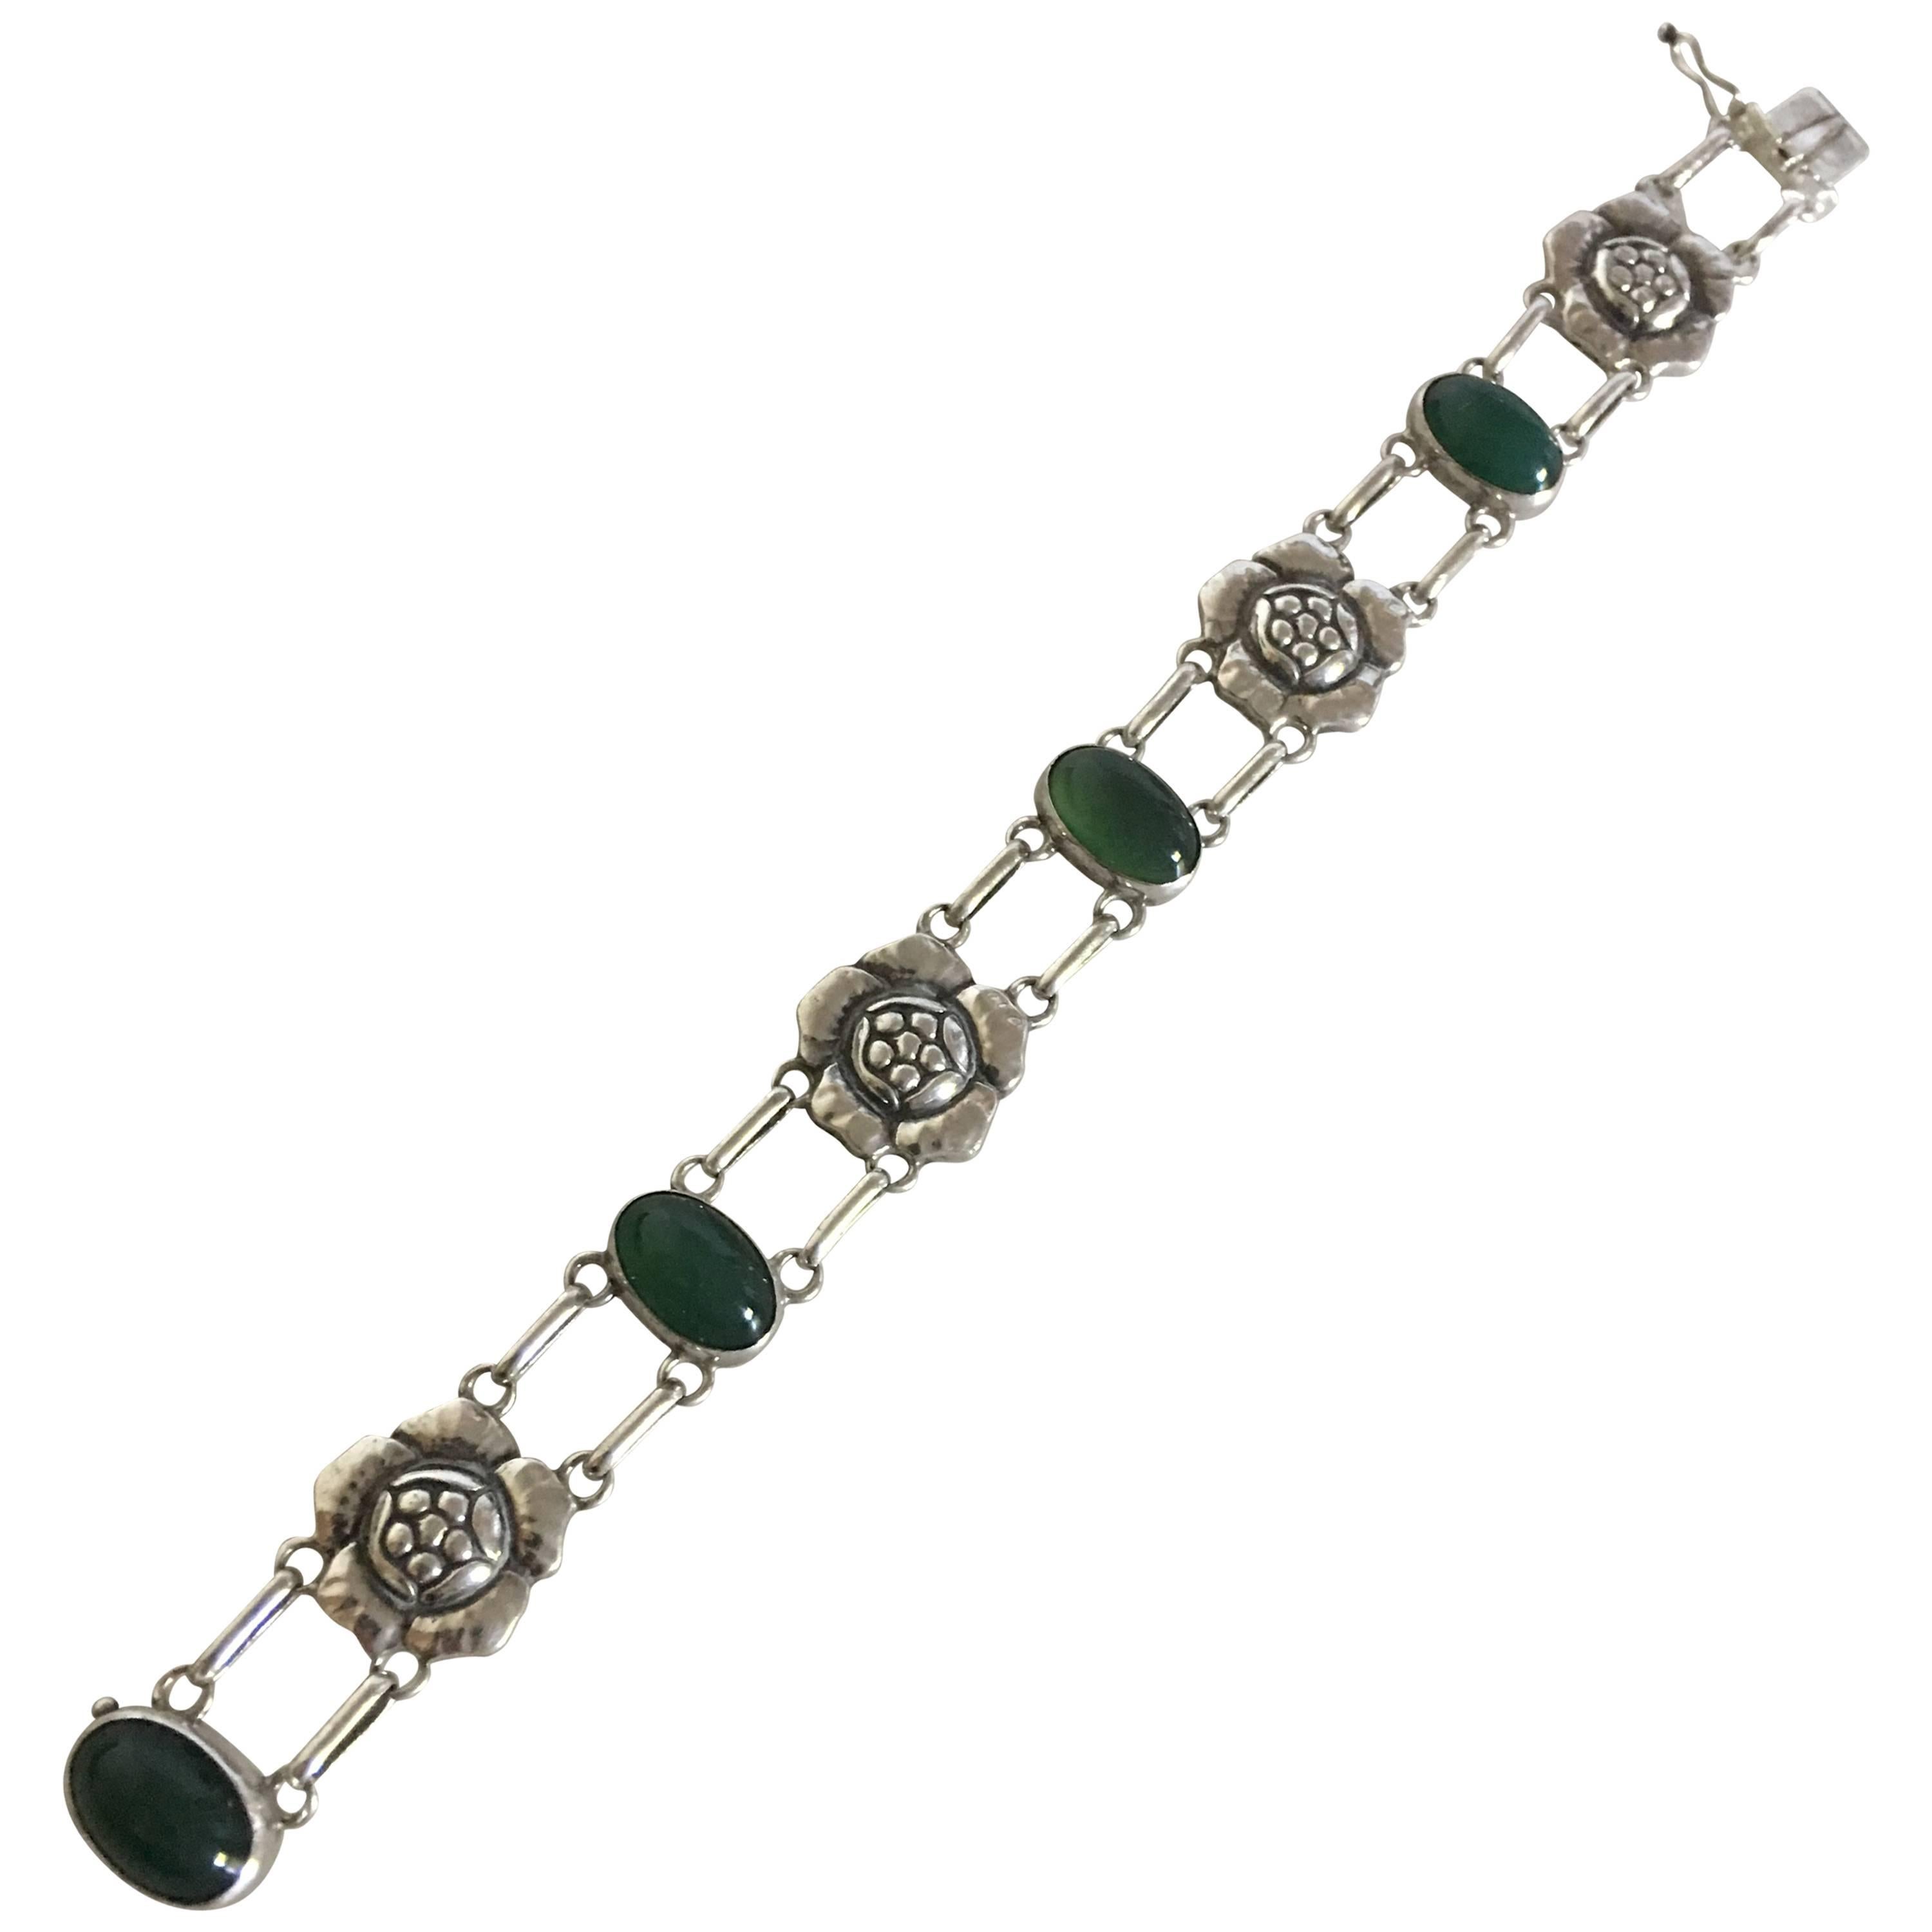 Georg Jensen Silver Bracelet No. 12 with Green Agates For Sale